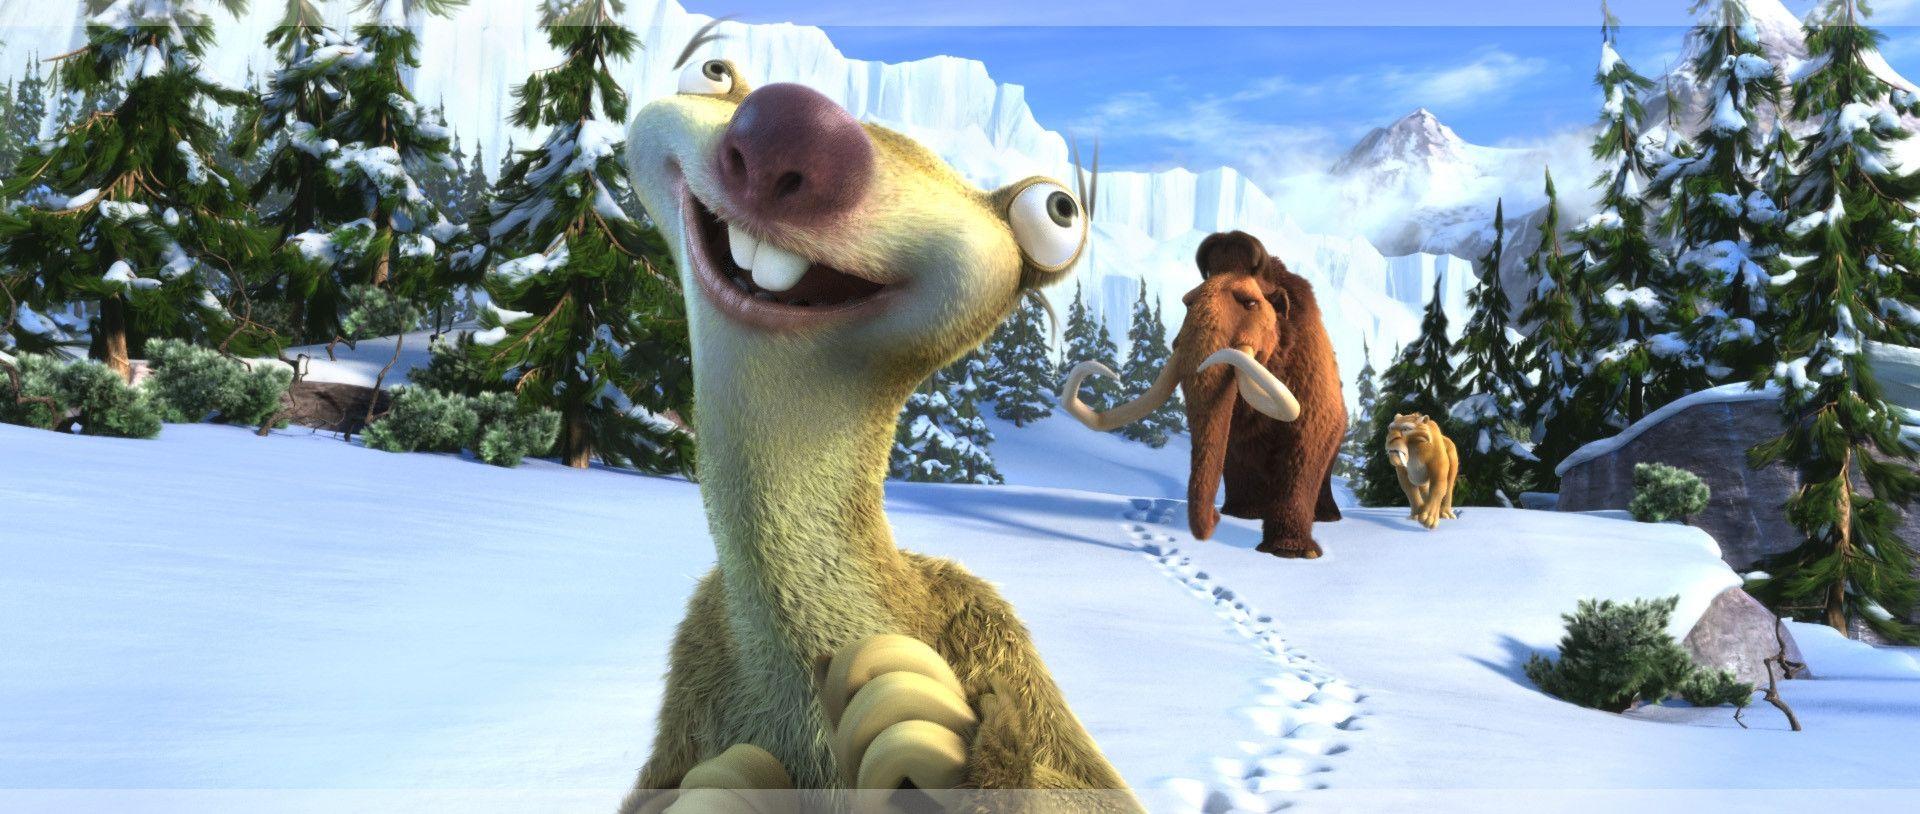 Ice Age Full HD Quality Wallpaper, Ice Age Wallpaper